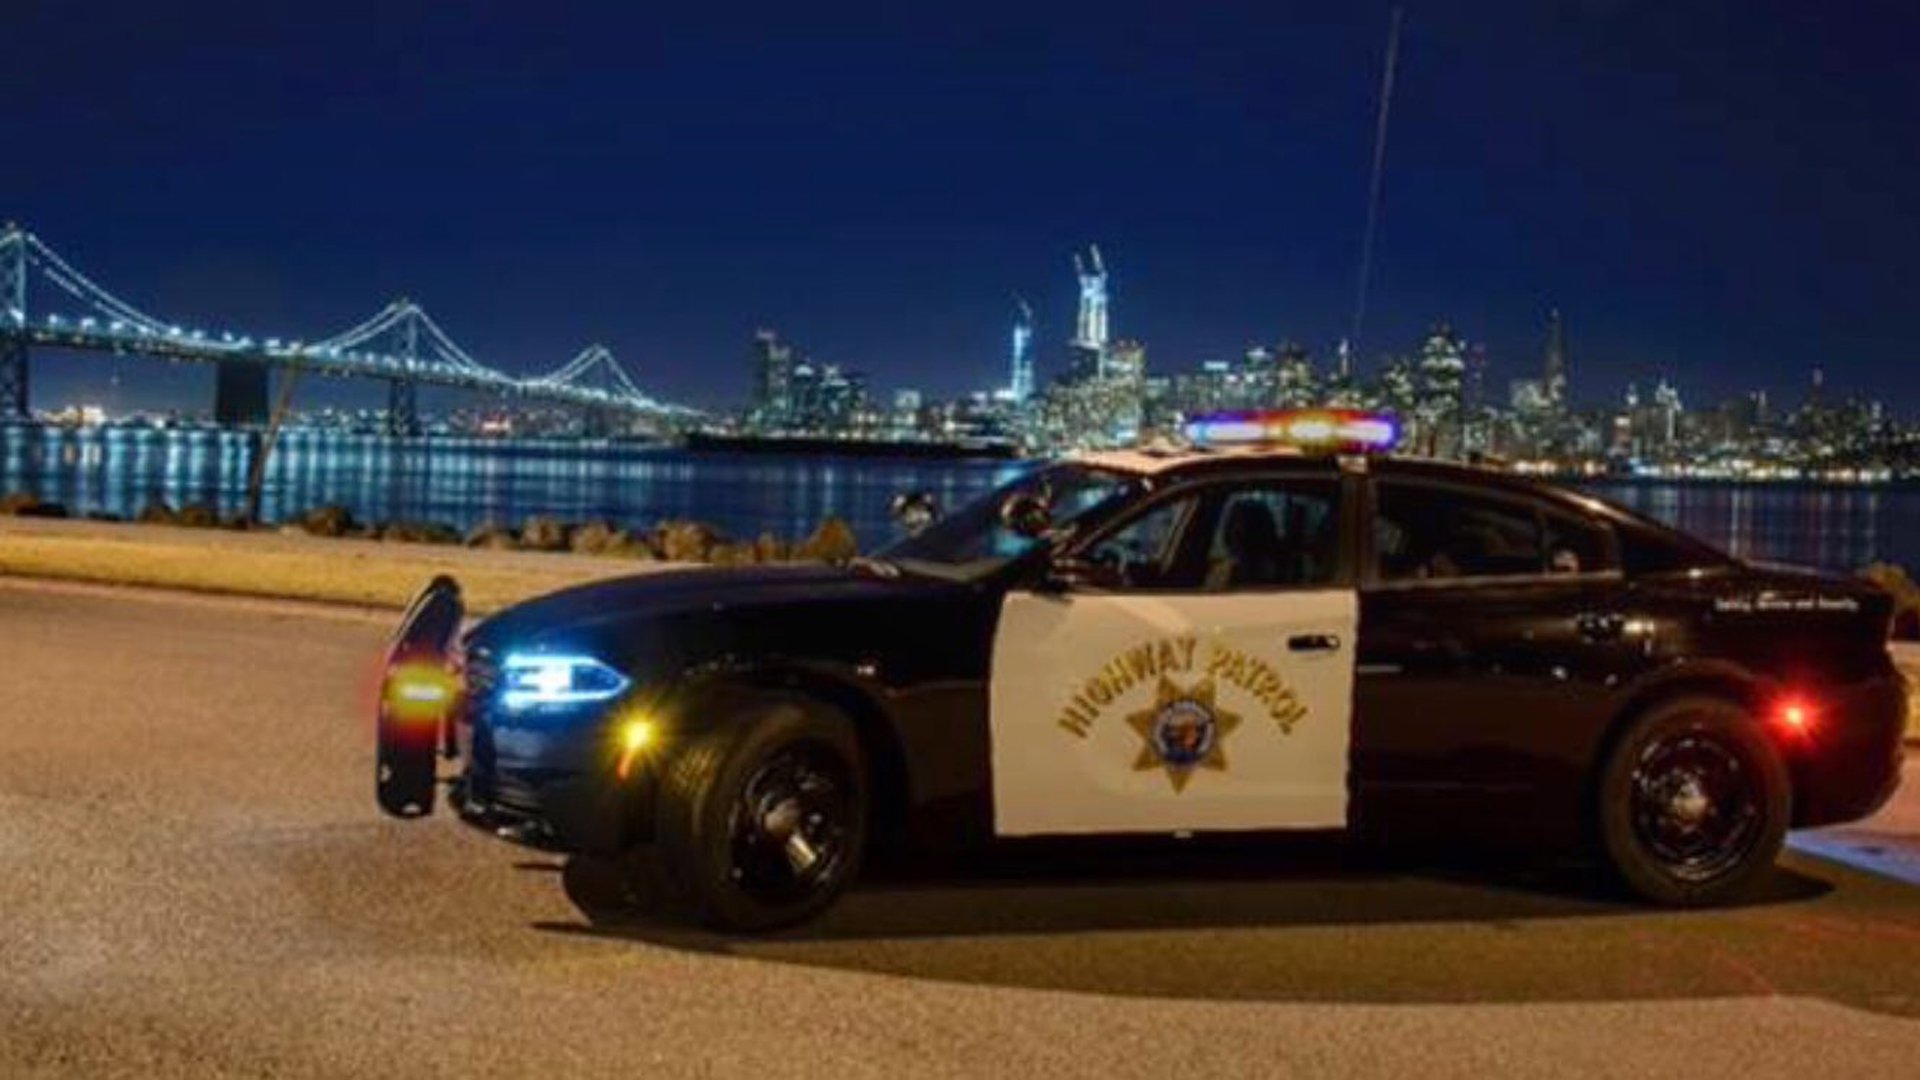 Nearly 500 DUI Arrests Made by CHP Over New Year's Holiday in California